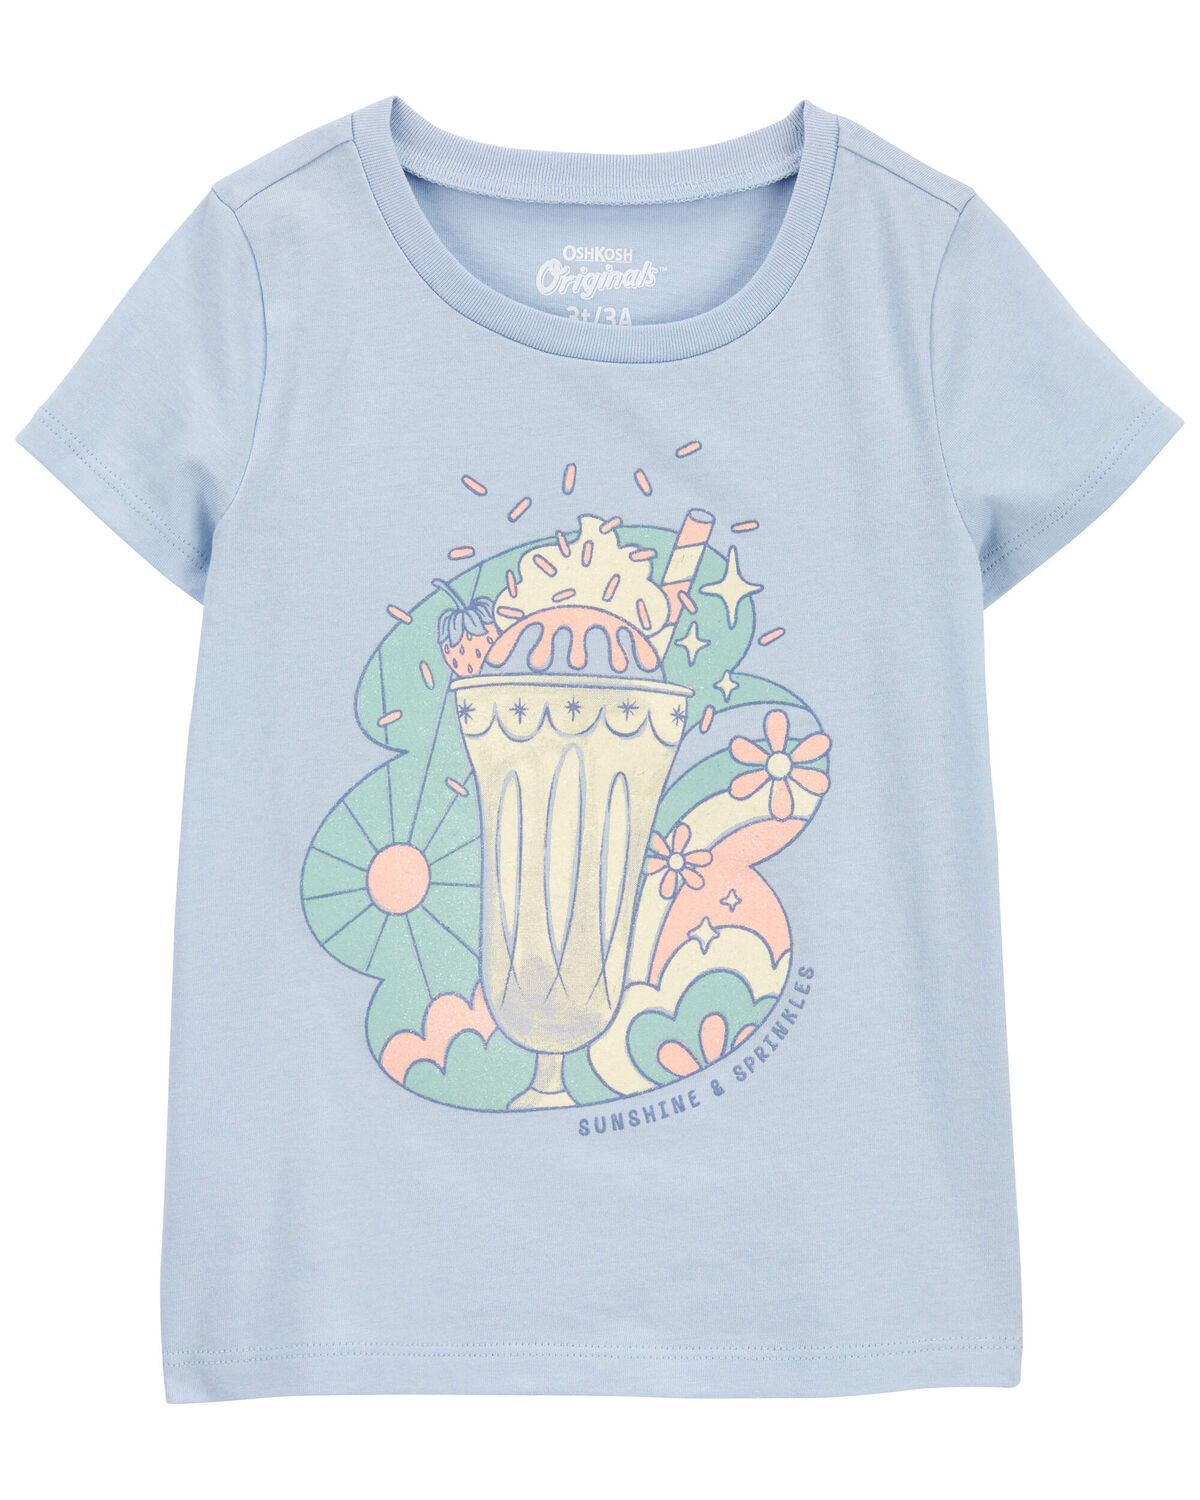 Toddler Sunshine and Sprinkles Graphic Tee